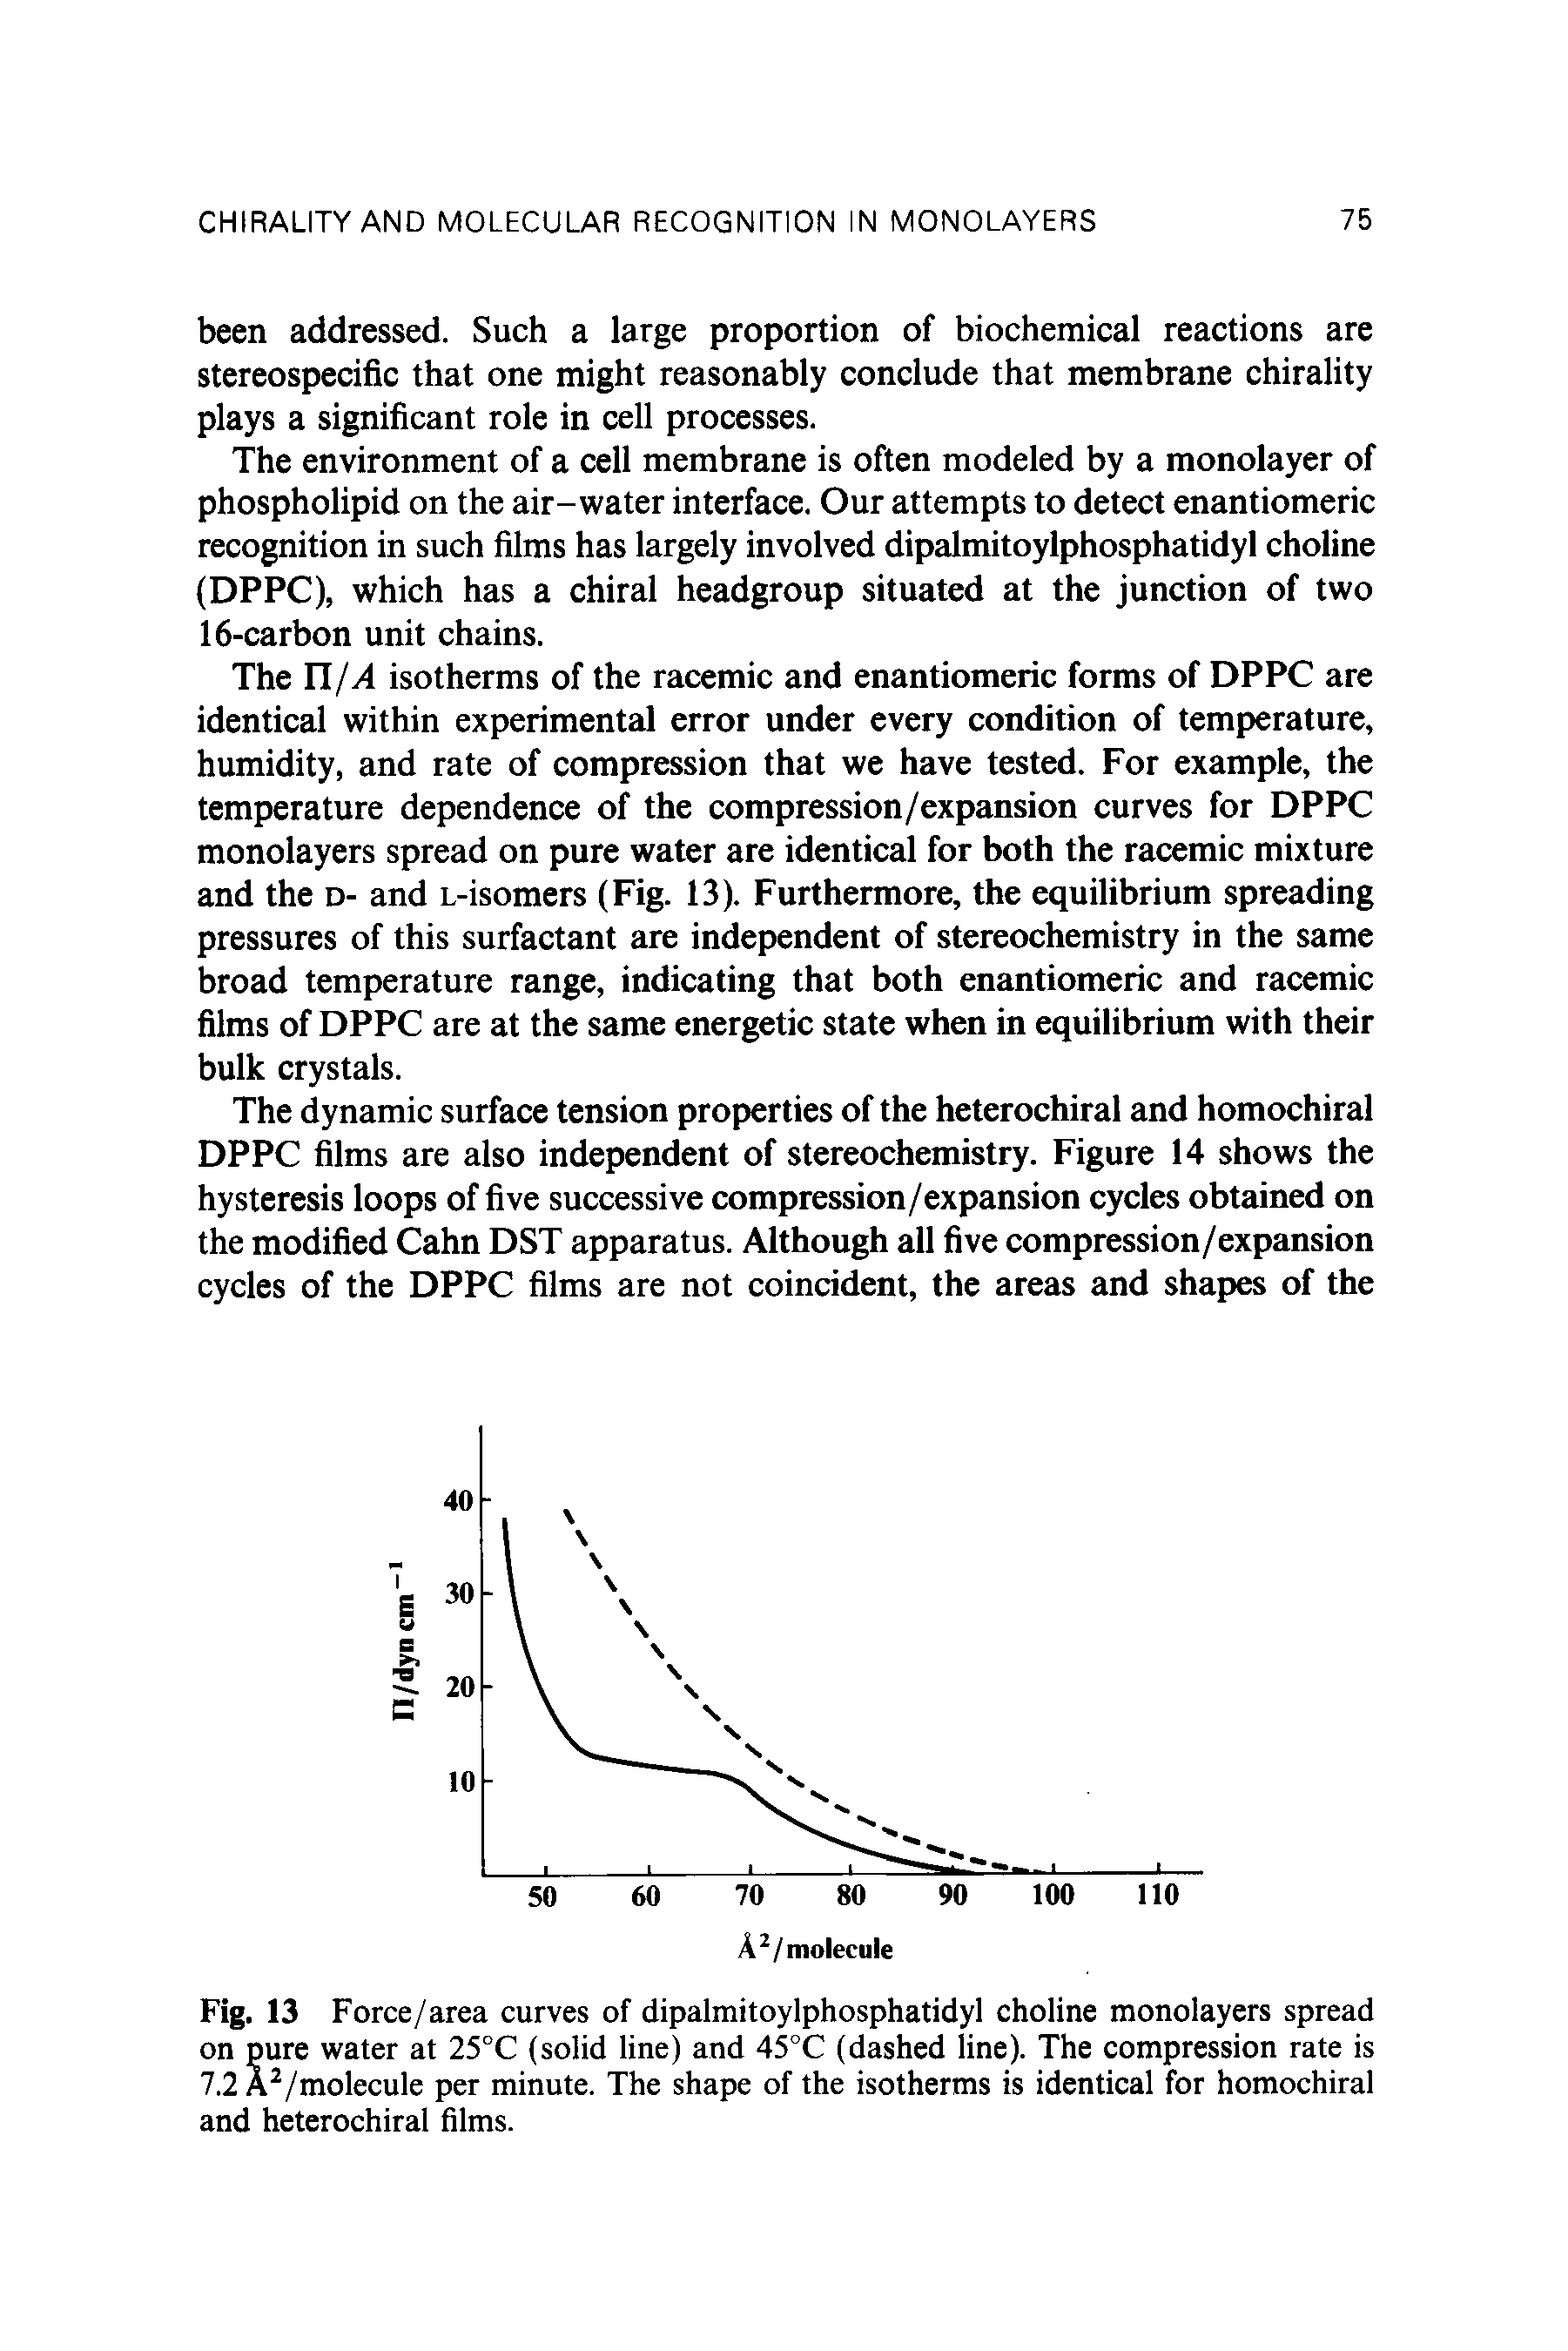 Fig. 13 Force/area curves of dipalmitoylphosphatidyl choline monolayers spread on pure water at 25°C (solid line) and 45°C (dashed line). The compression rate is 7.2 A2/molecule per minute. The shape of the isotherms is identical for homochiral and heterochiral films.